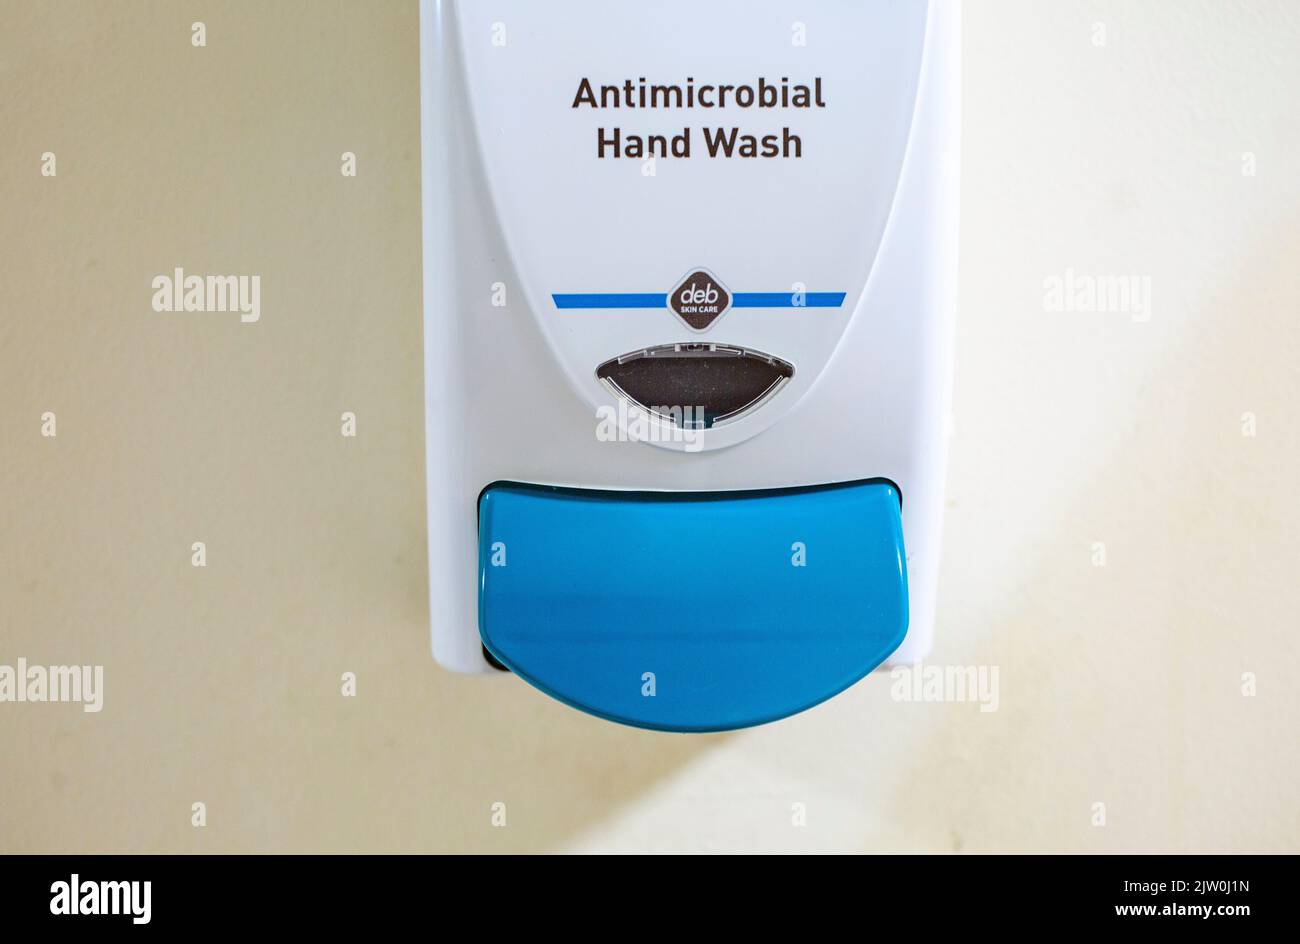 Antimicrobial  hand wash lotion soap dispenser Stock Photo